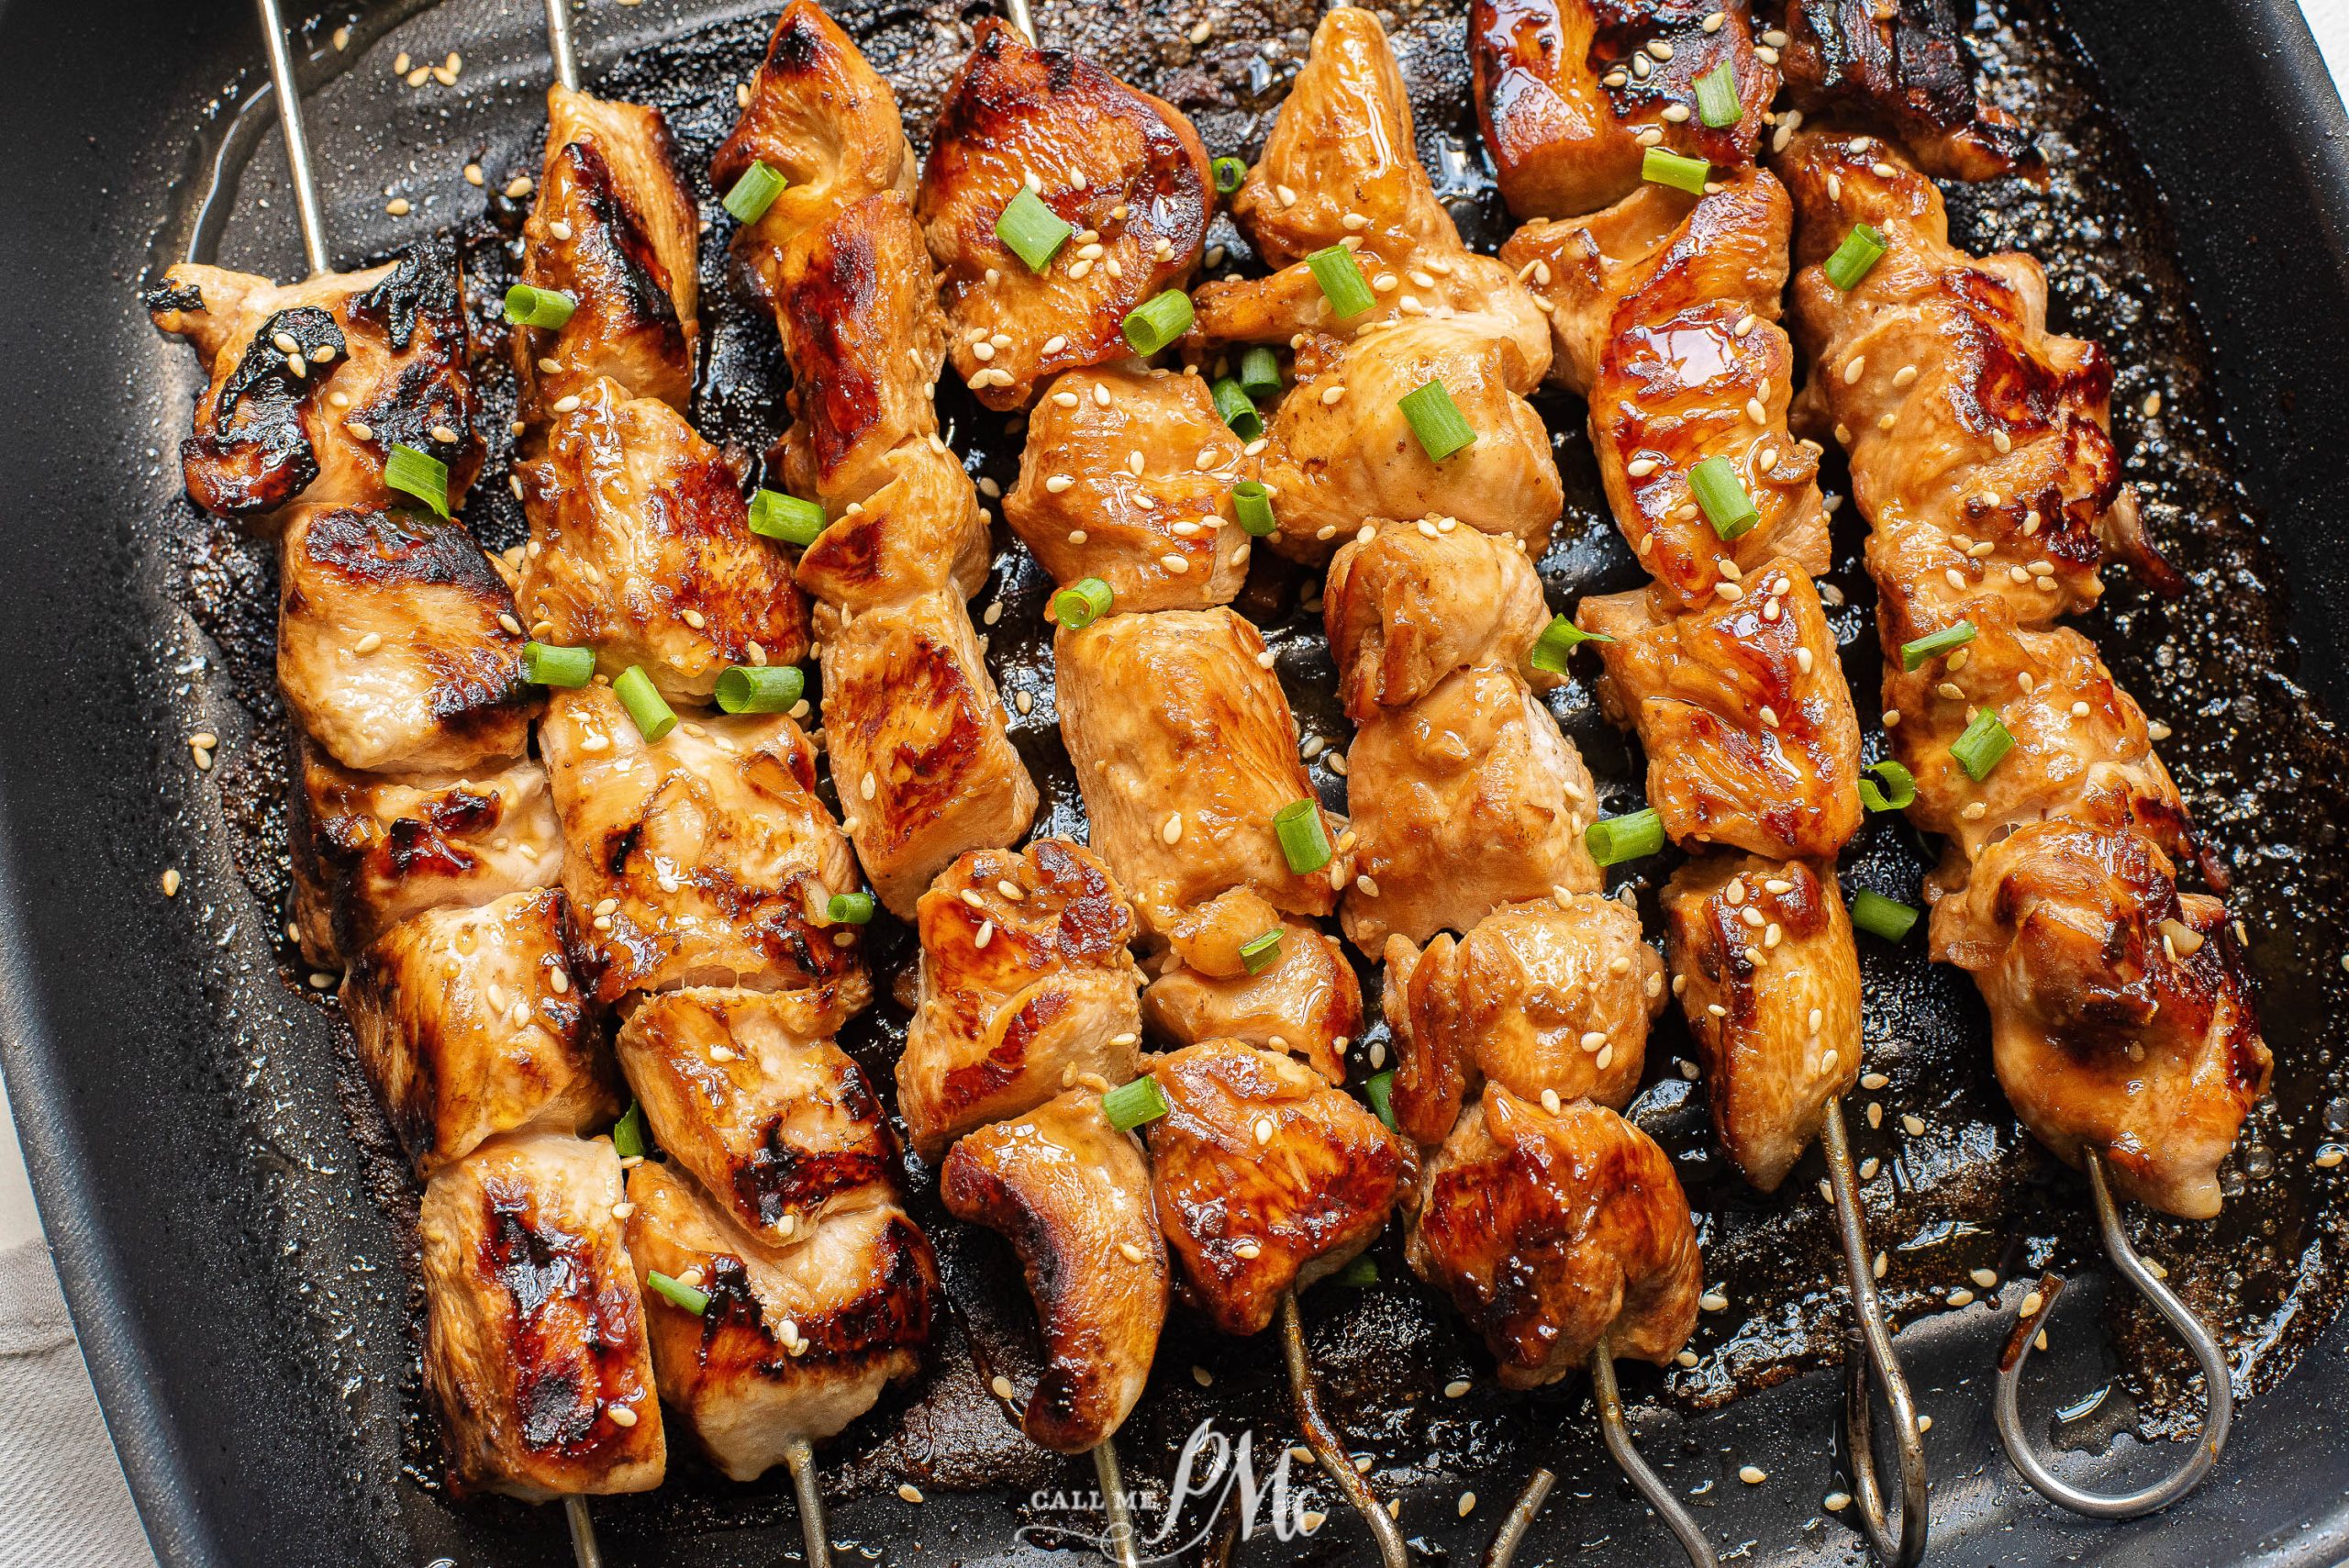 Cooked chicken chunks on skewers in a grill pan.